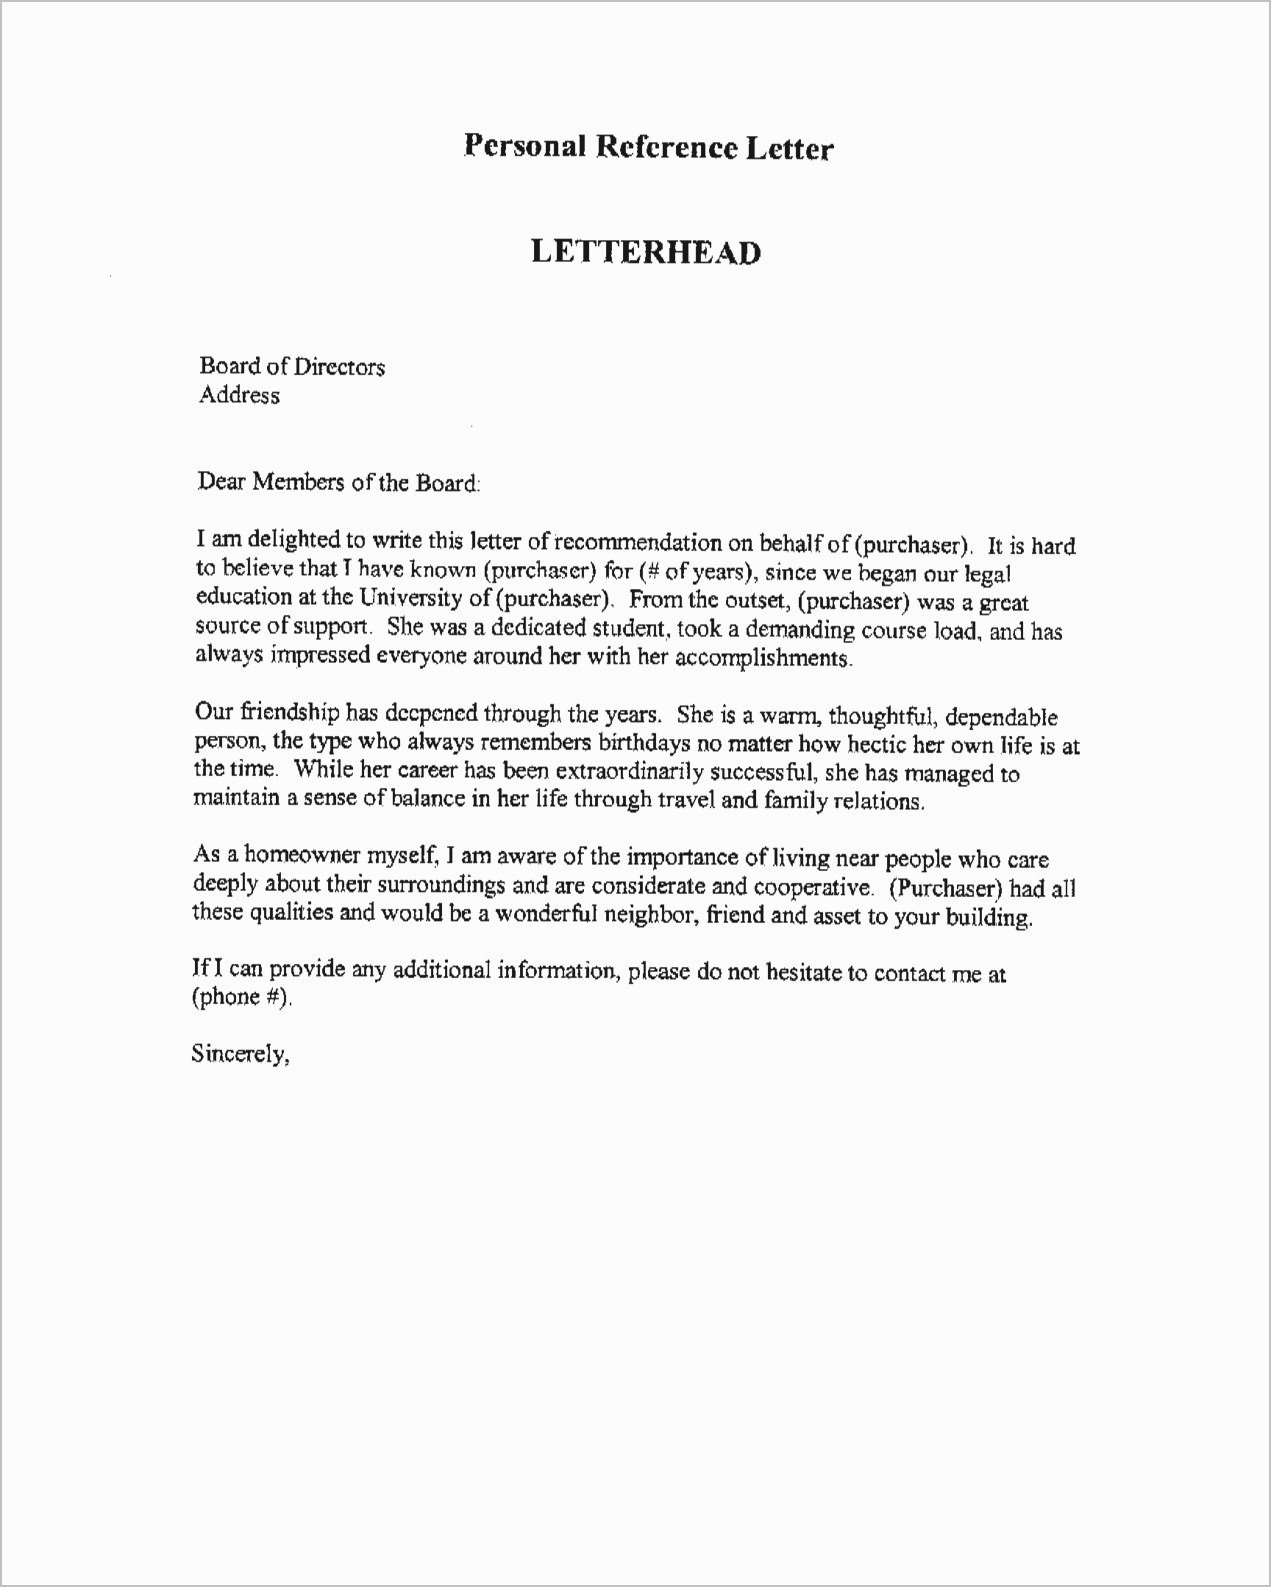 Personal Letter Of Recommendation Template Beautiful 18 Personal Reference Letter for Co Op Board